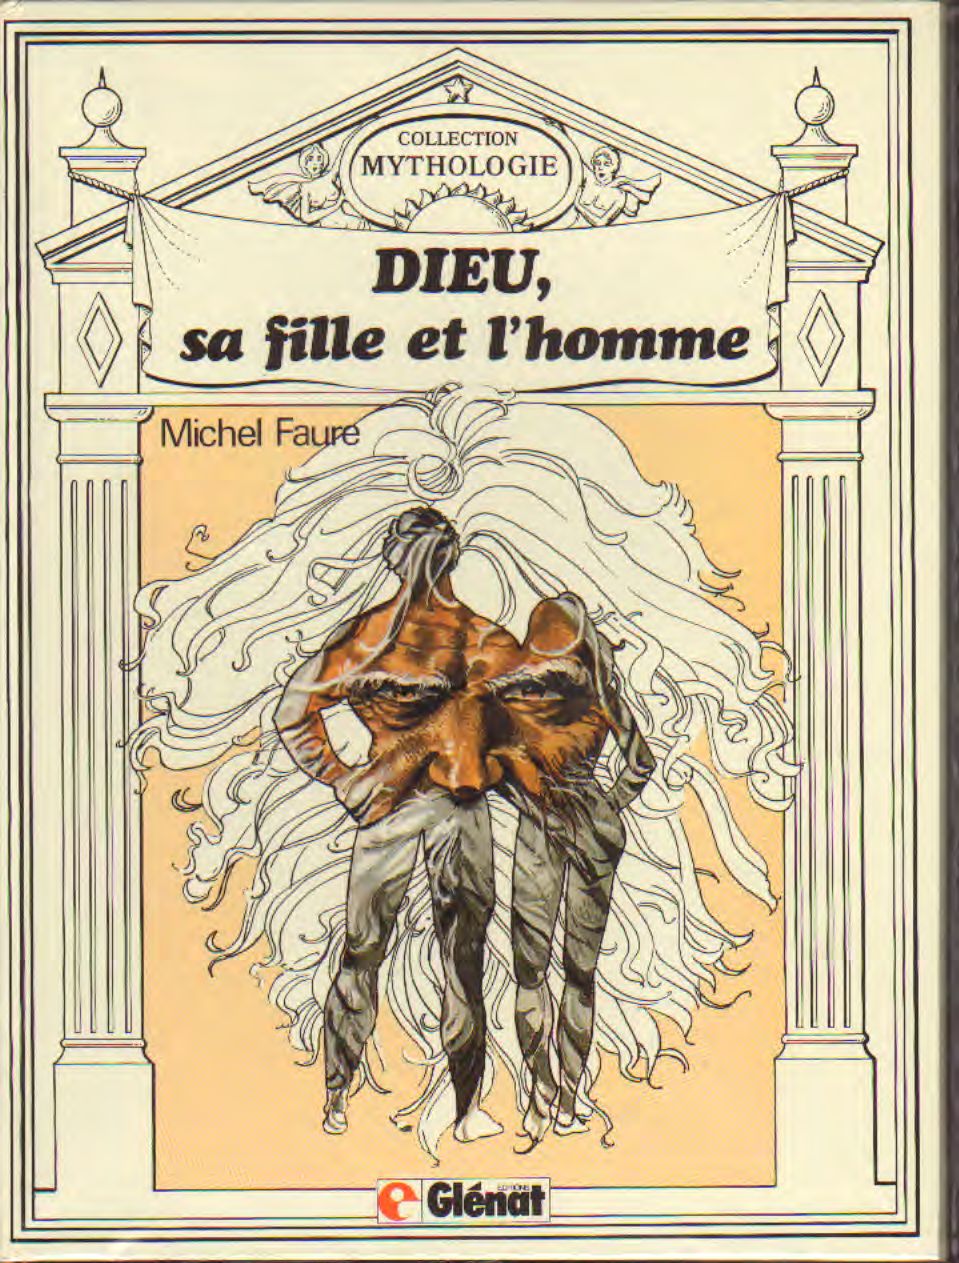 Faure - Dieu, sa fille at l'homme